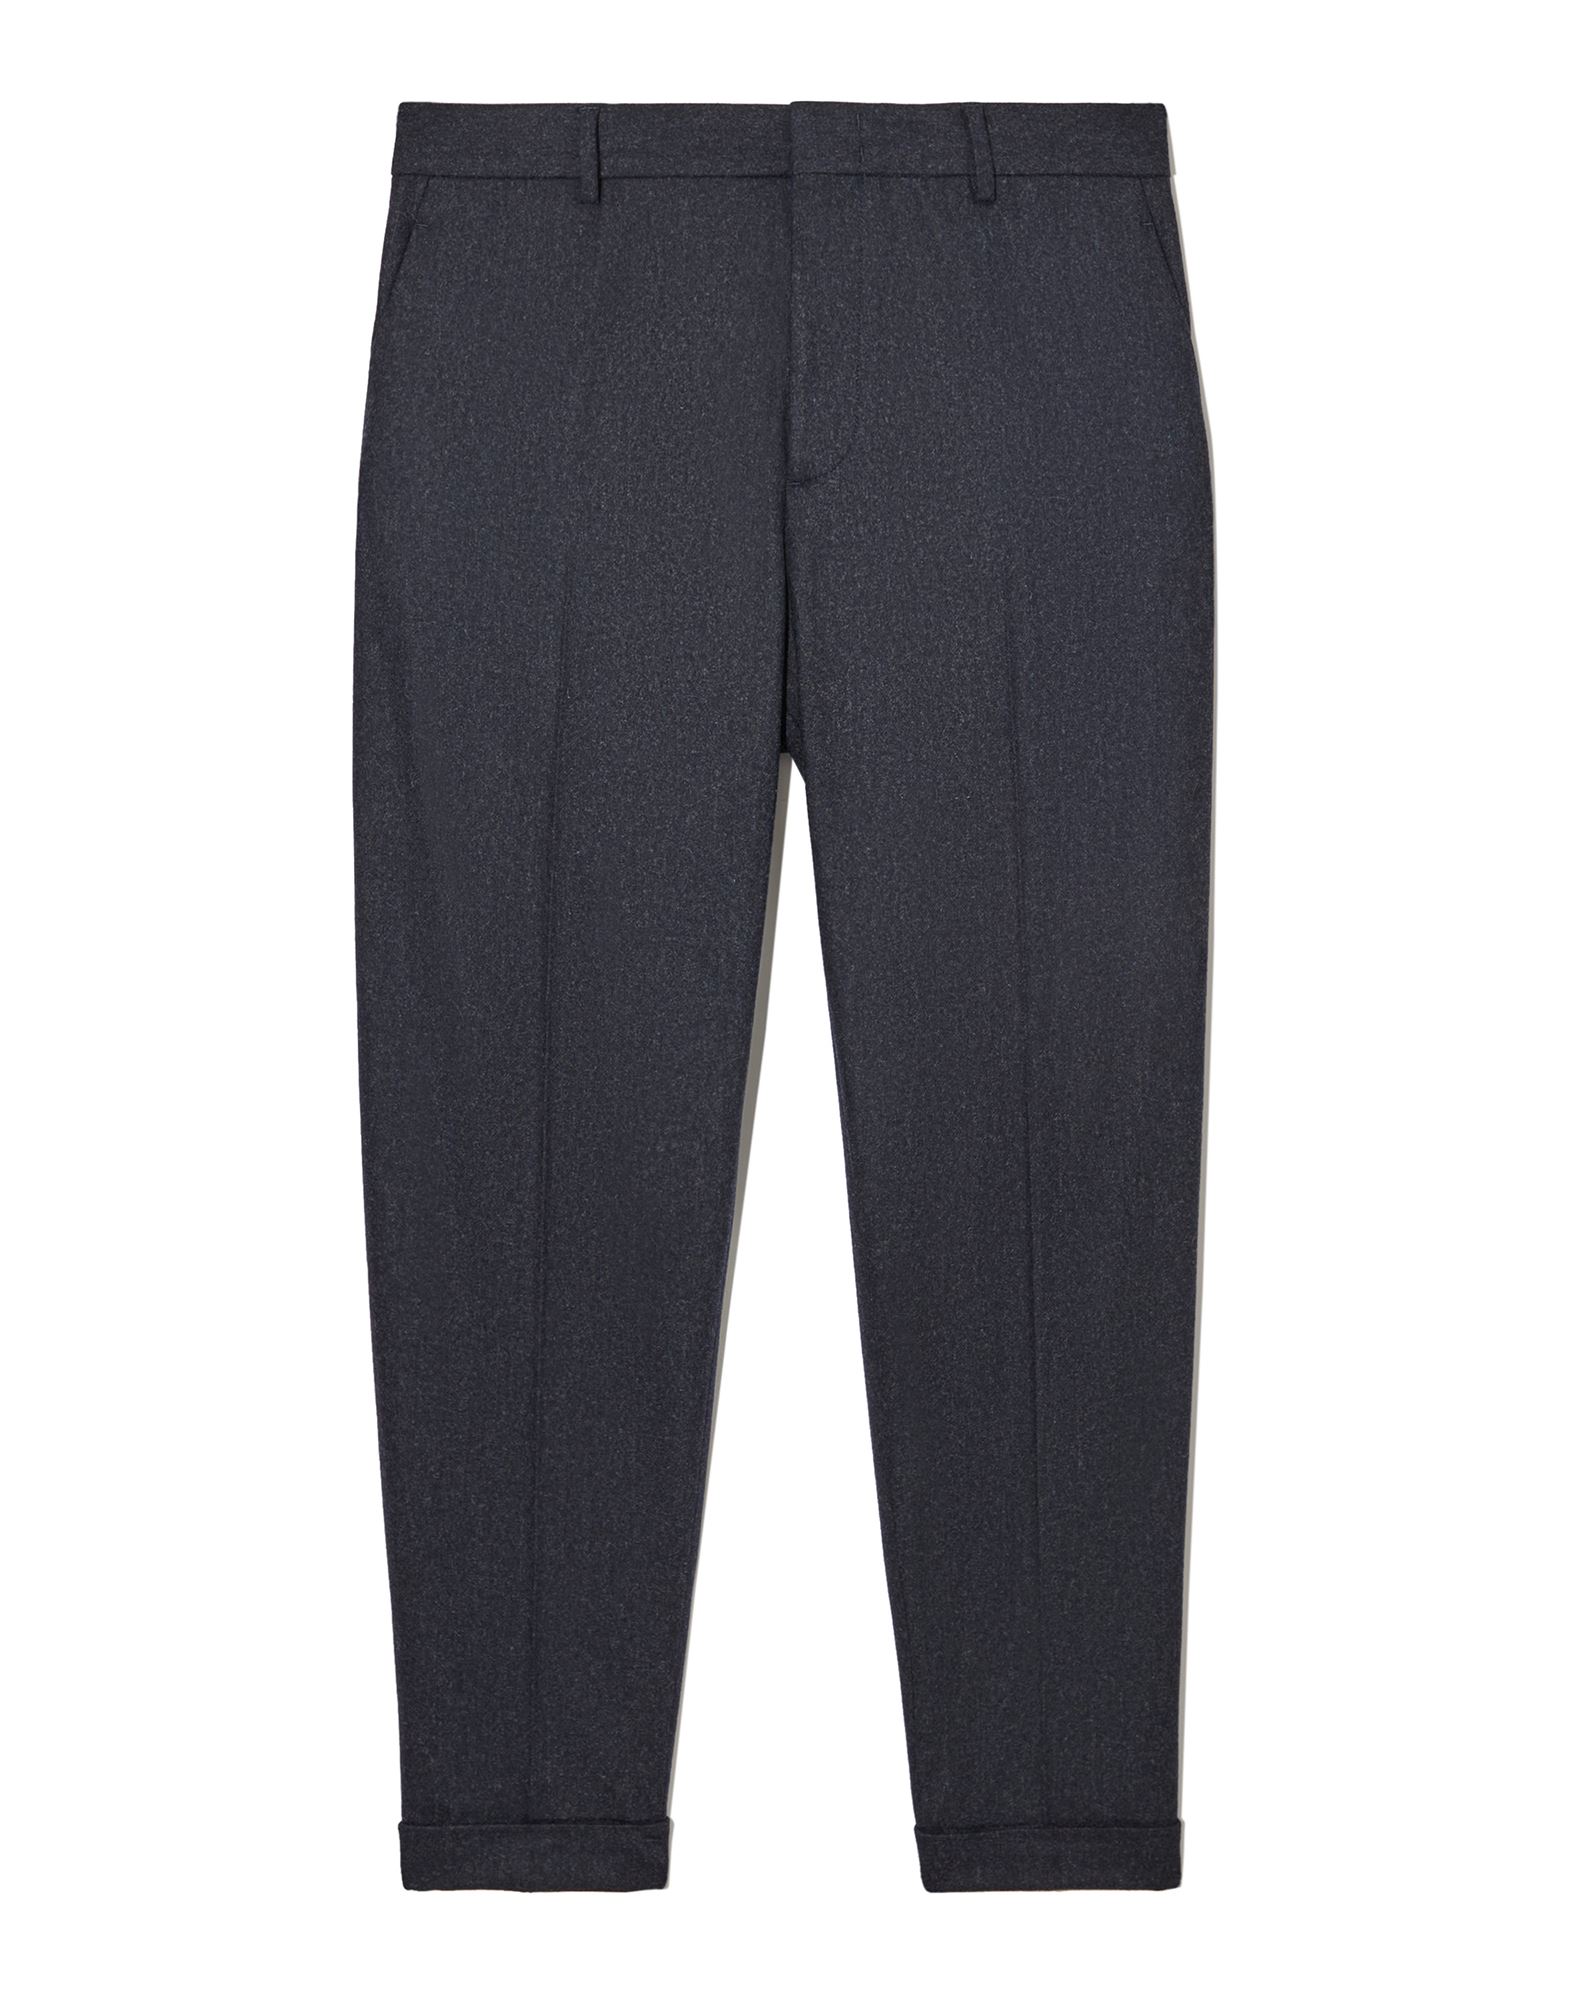 COS COS MAN PANTS NAVY BLUE SIZE 36 WOOL, POLYAMIDE, CASHMERE